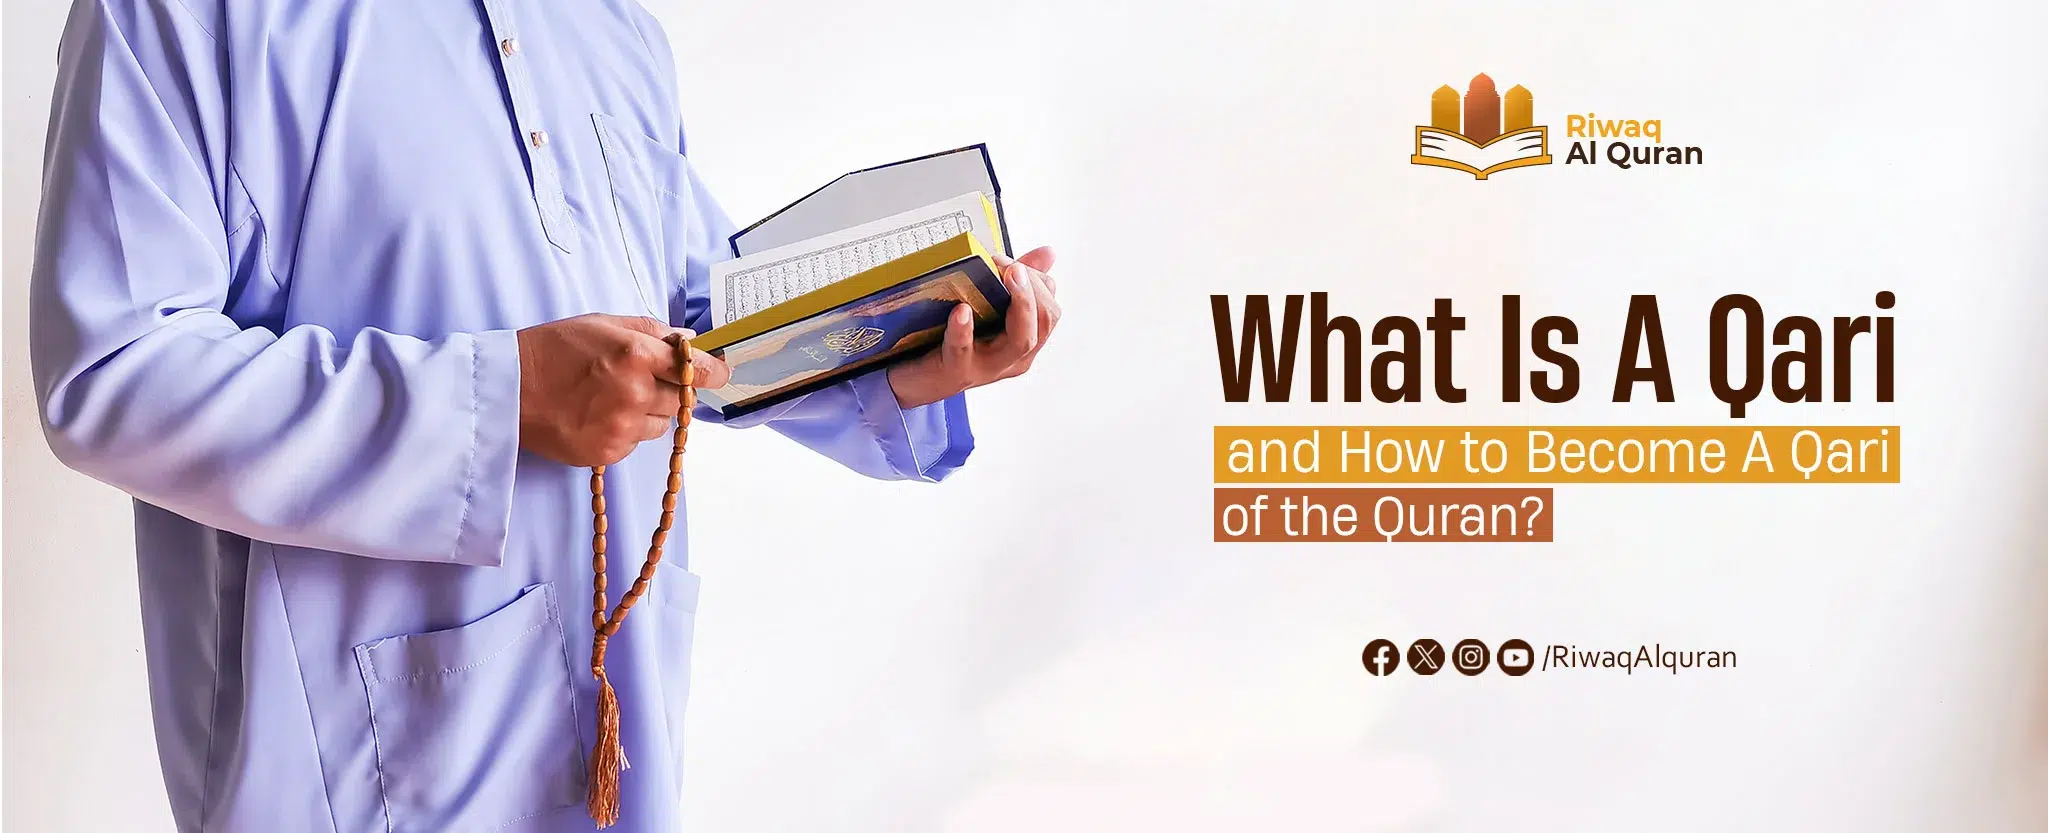 What Is a Qari and How to Become a Qari of the Quran?